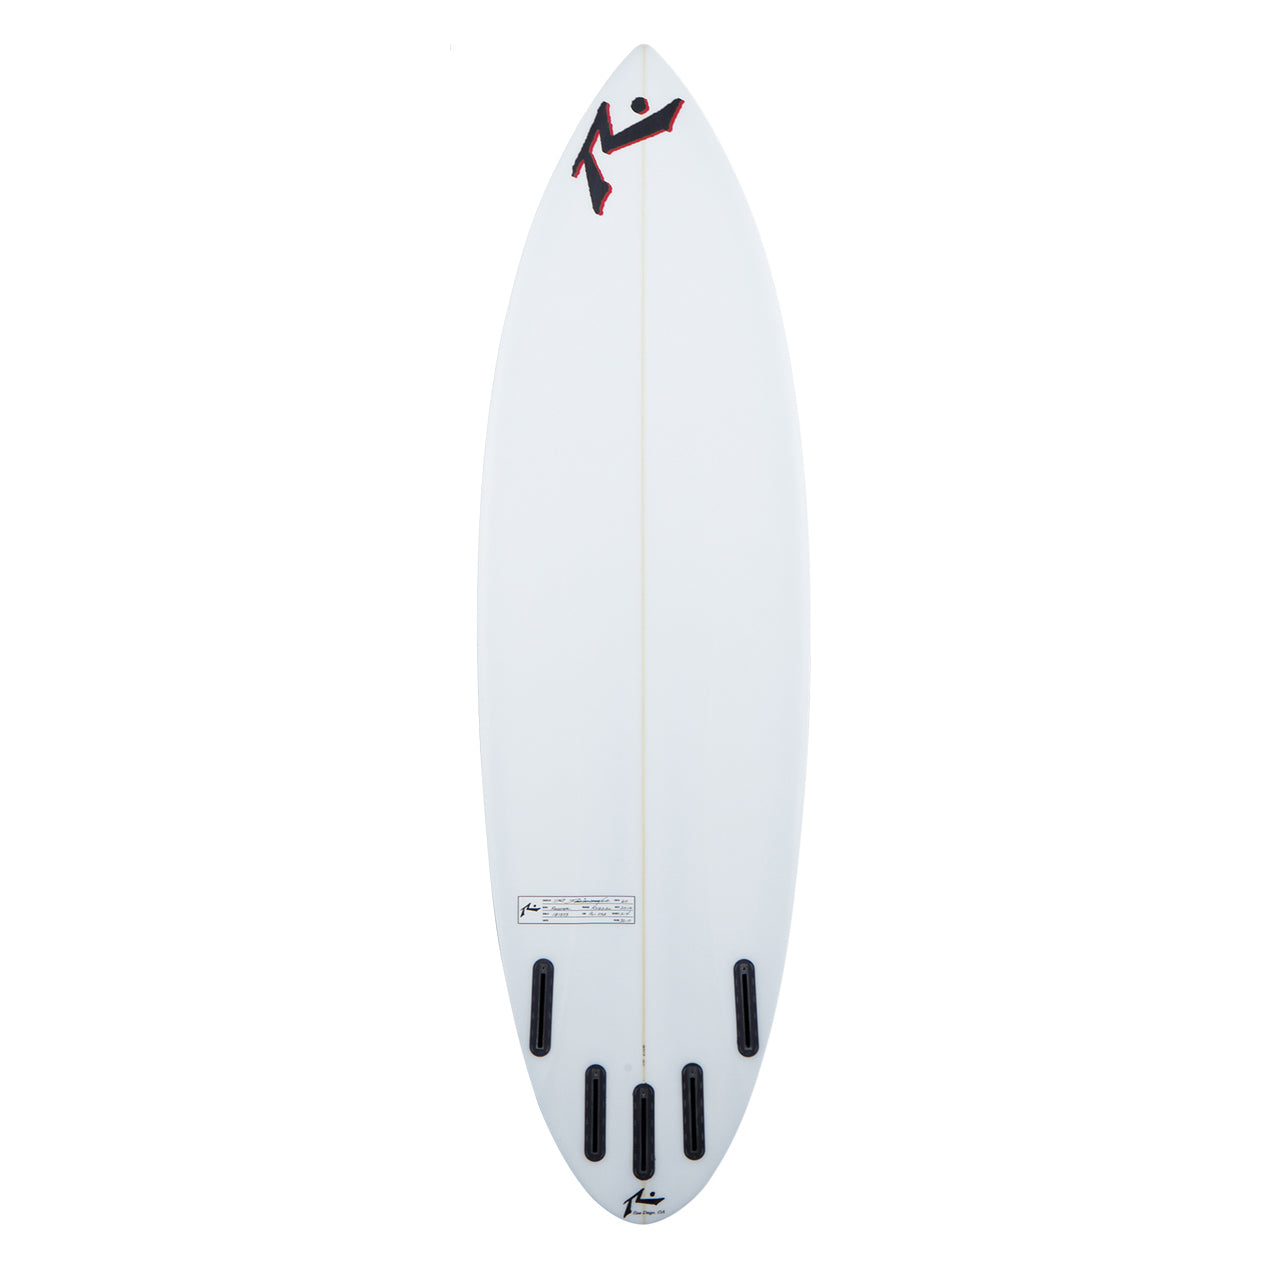 The Rooster - High Performance Shortboard - Rusty Surfboards - Top View